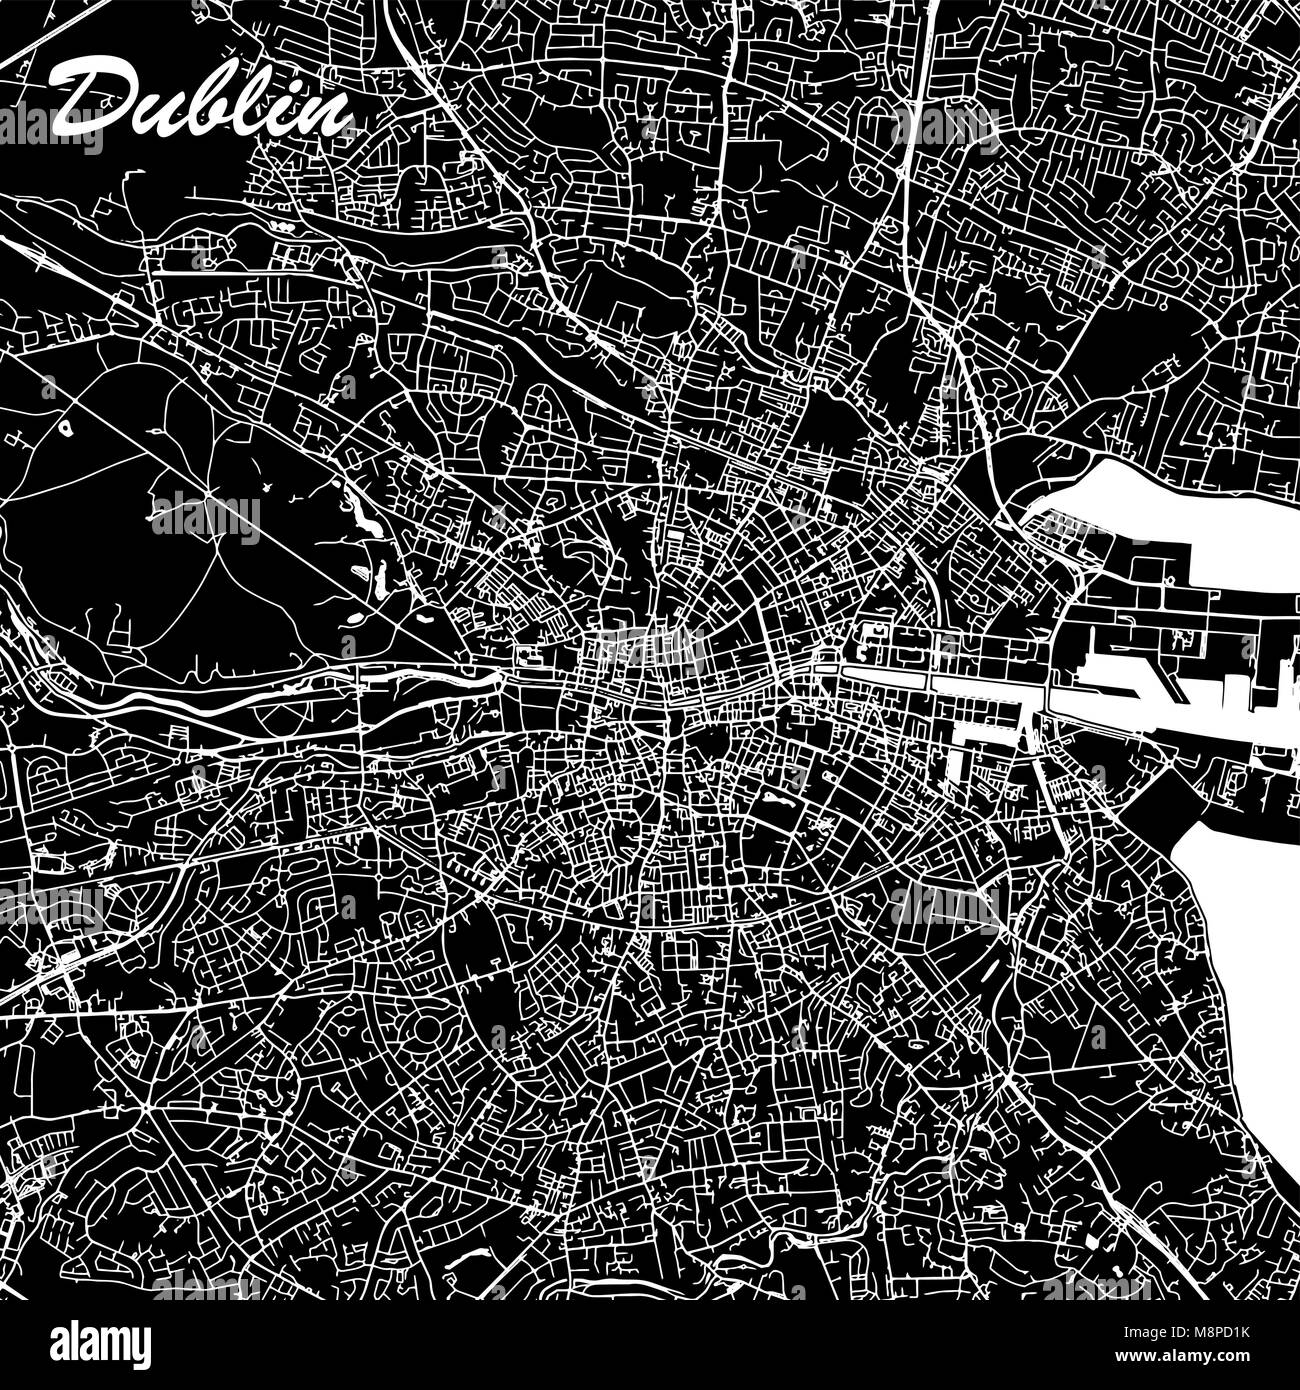 Dublin Ireland City Map Black and White. Abstract Vector Graphic with Highways, Roads and smaller City Streets. Metropolitan Region Stock Vector